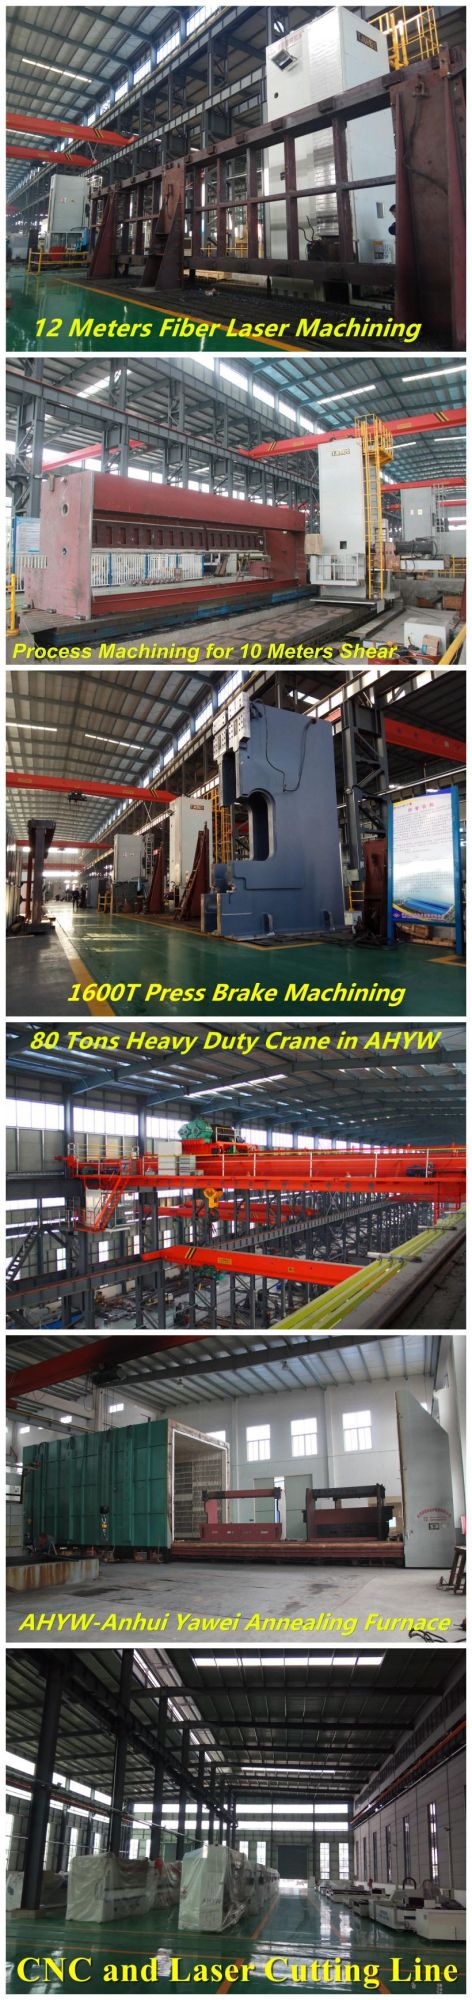 Industrial Guillotine Machine From Anhui Yawei with Ahyw Logo for Metal Sheet Cutting